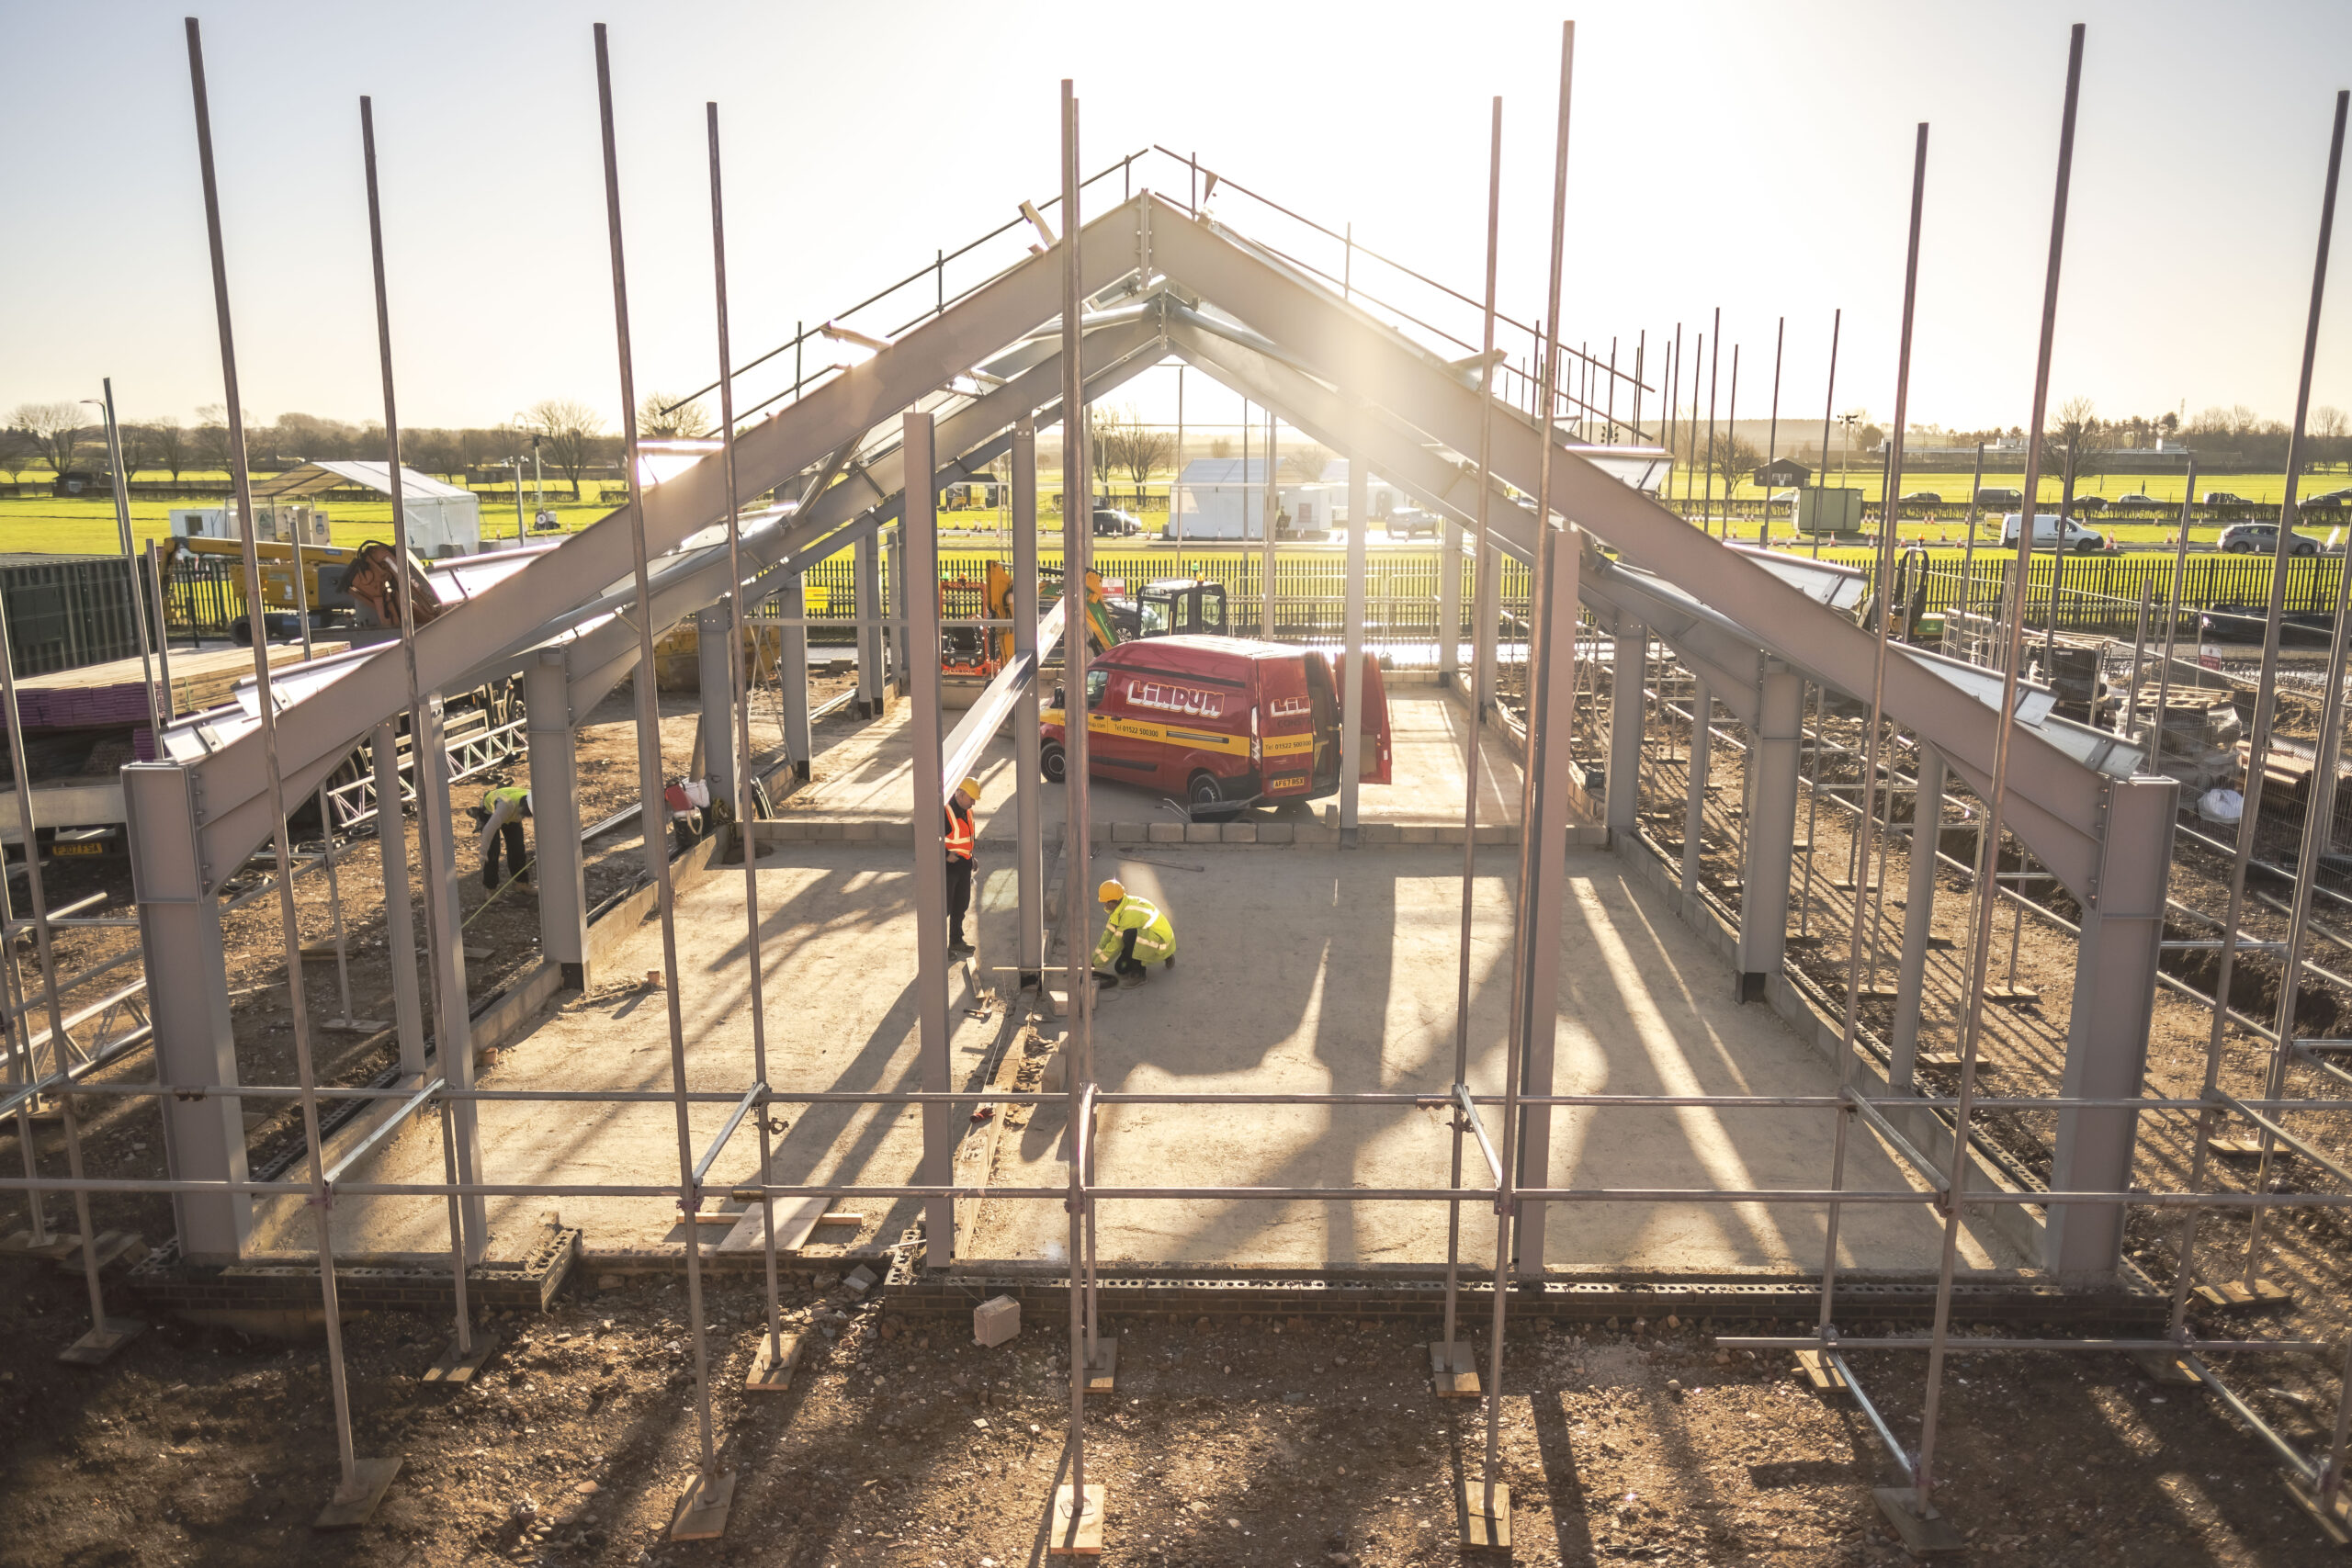 New Institute of Technology buildings begin to take shape at agricultural colleges